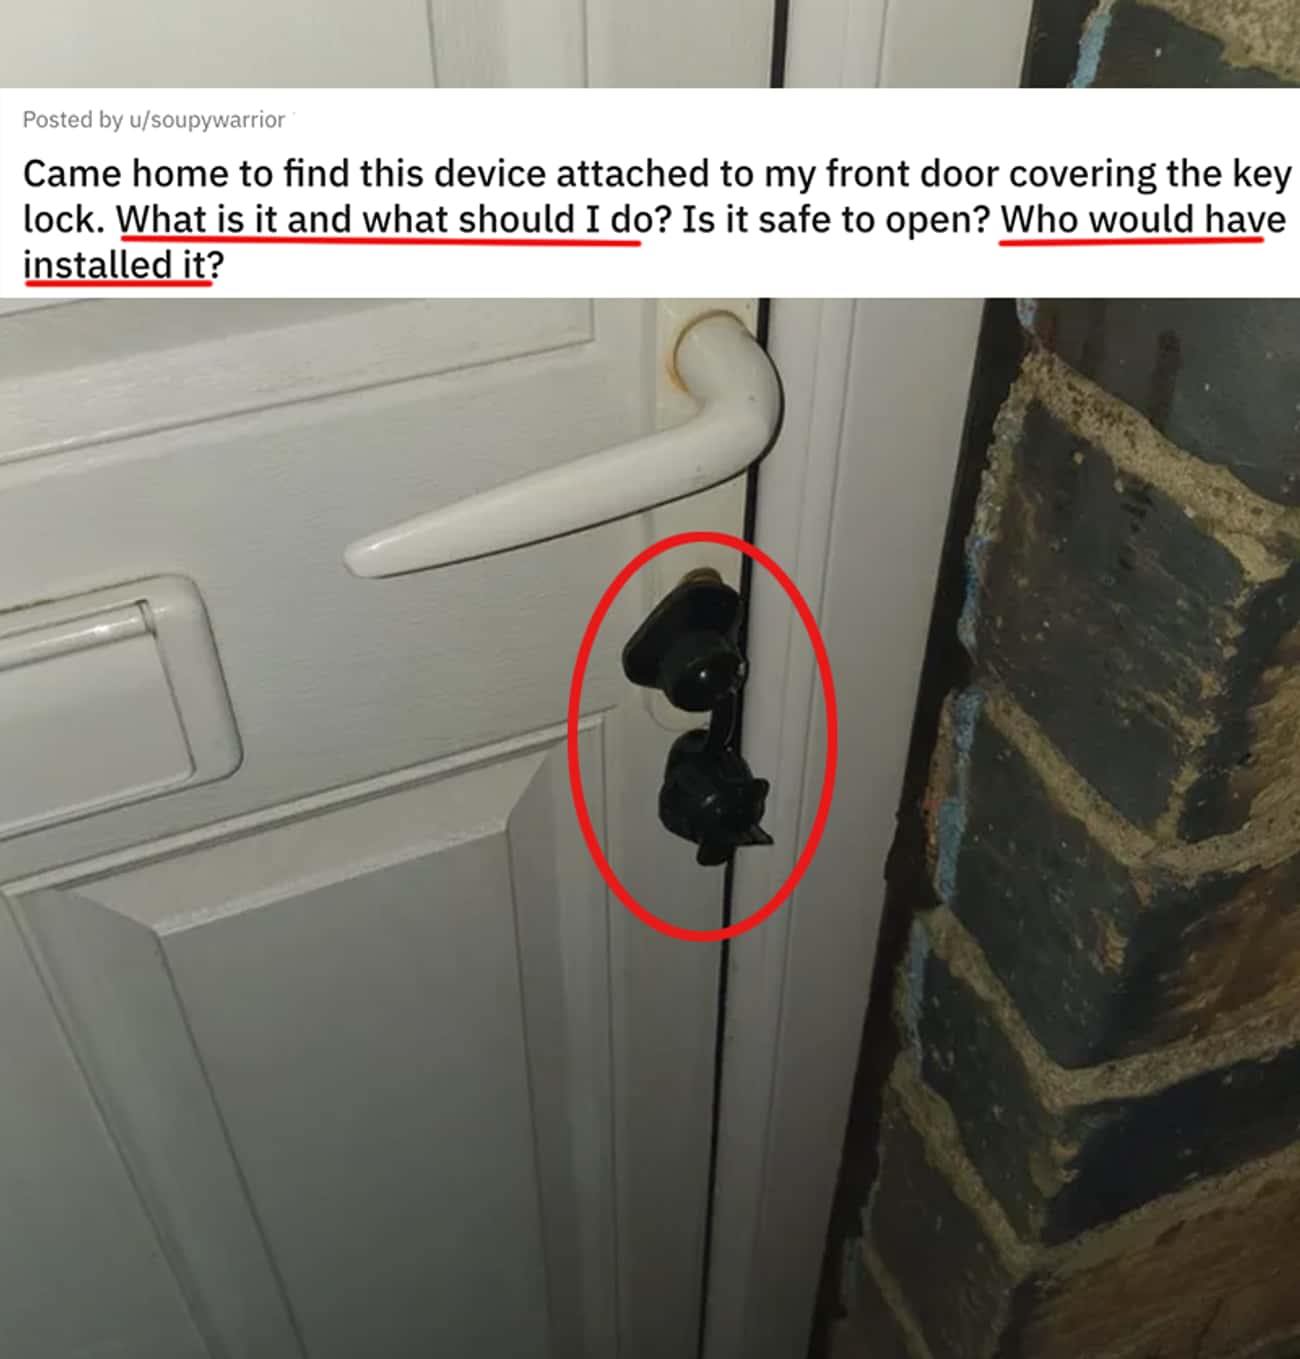 'I Came Home To Find This Device On My Front Door. What Is It And What Should I Do?'